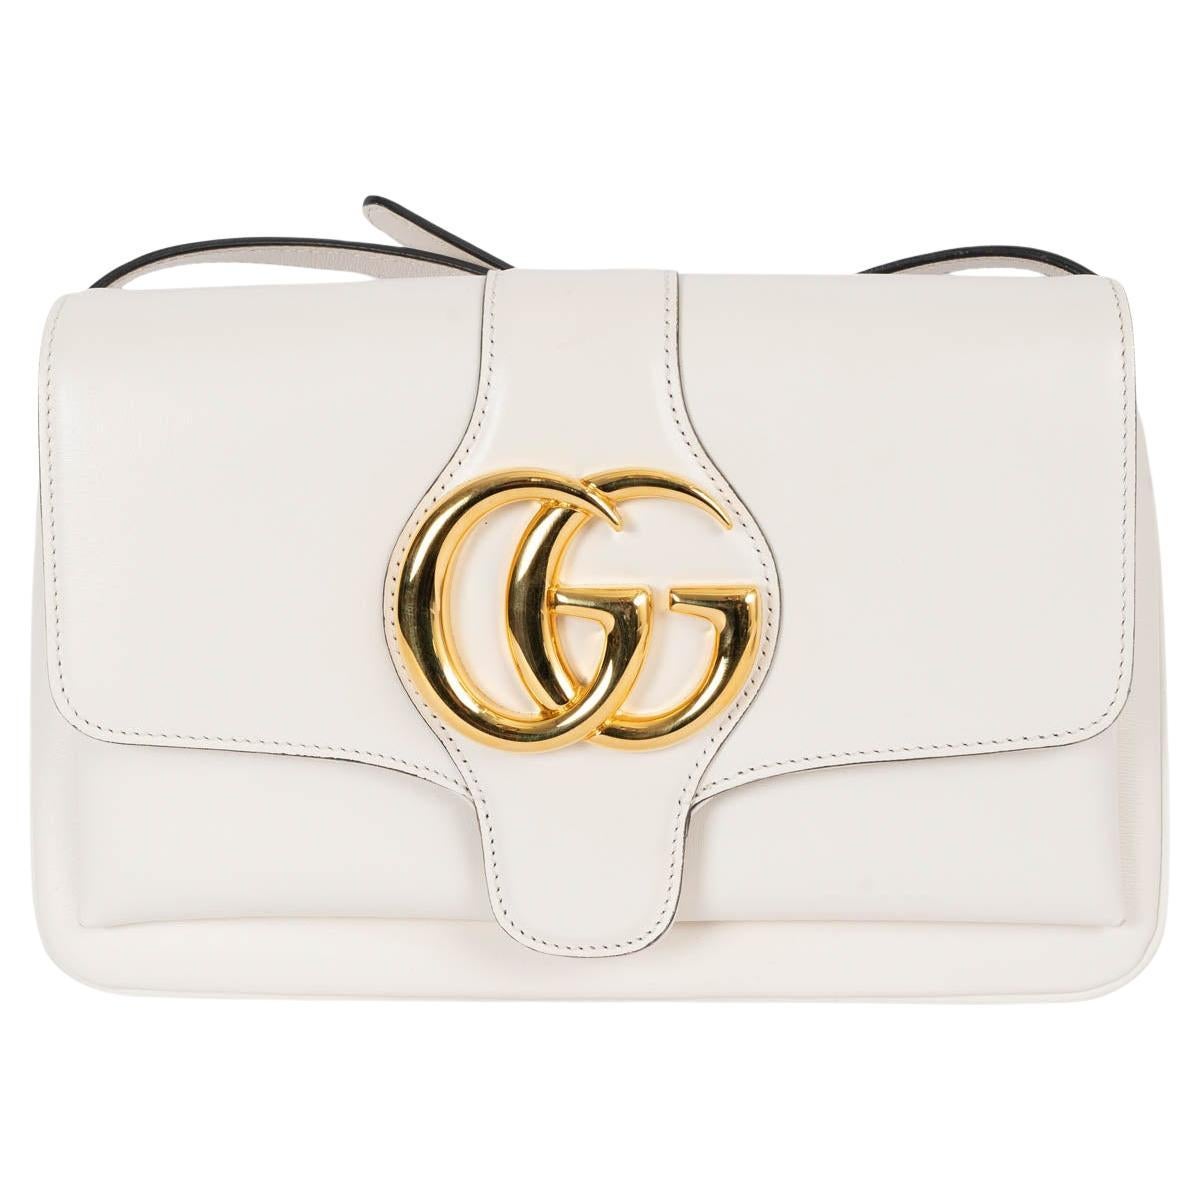 GUCCI white leather 2019 ARLI SMALL Shoulder Bag For Sale